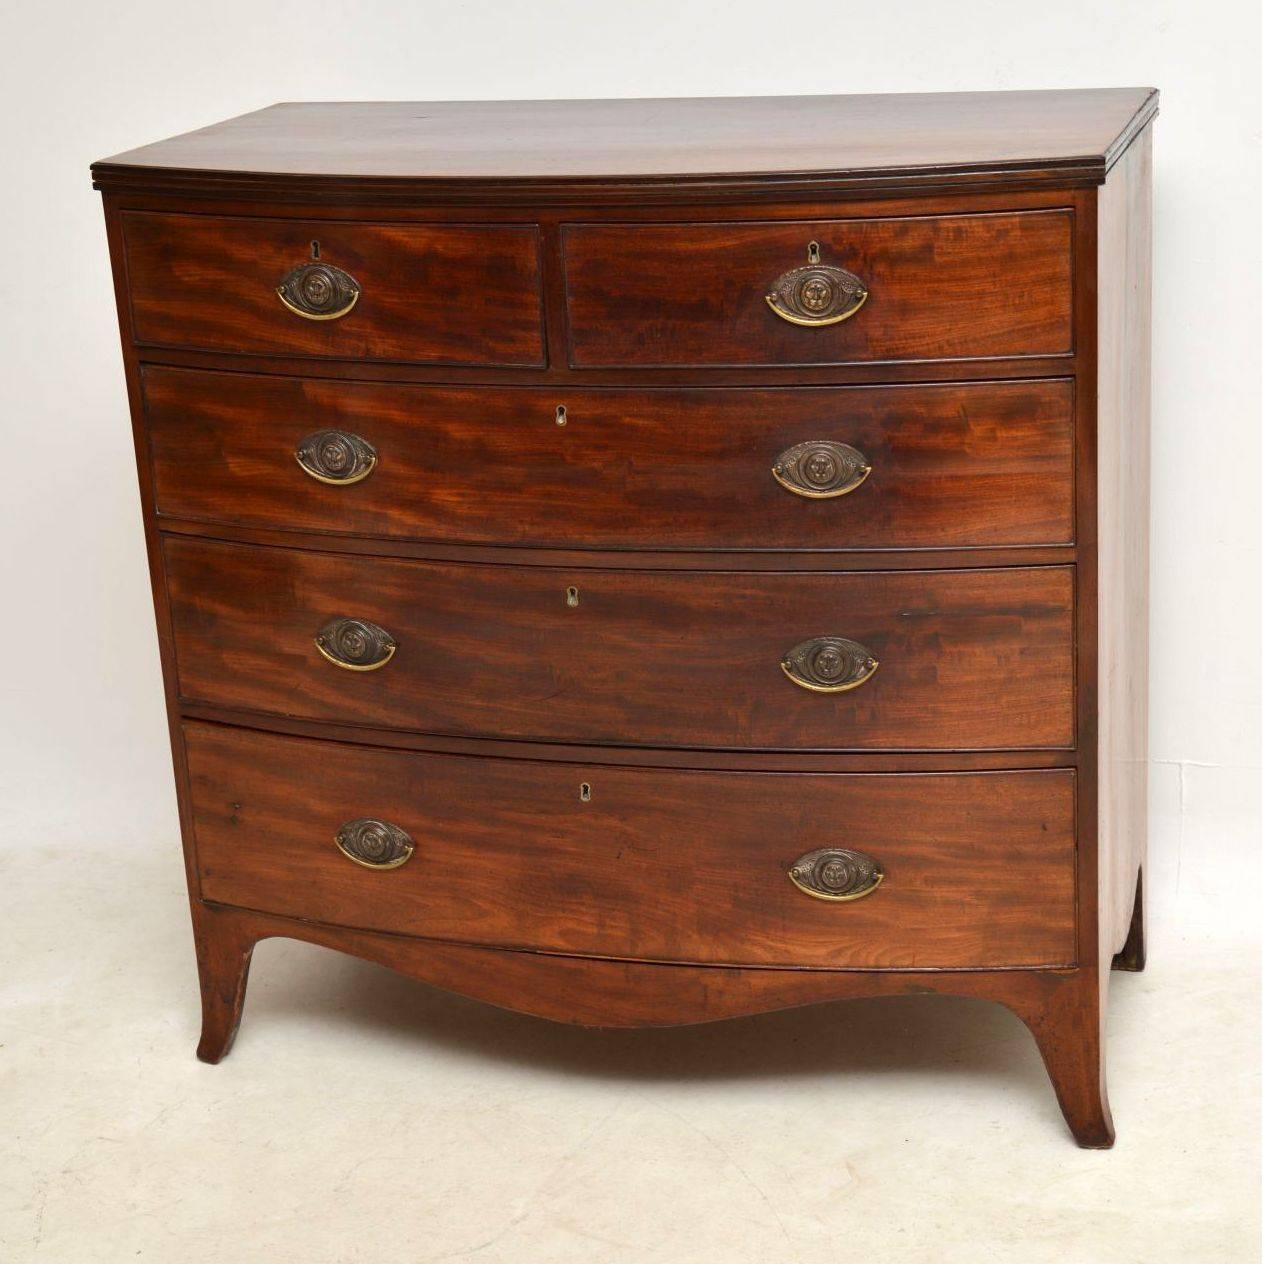 English Antique Georgian III Mahogany Bow Fronted Chest of Drawers